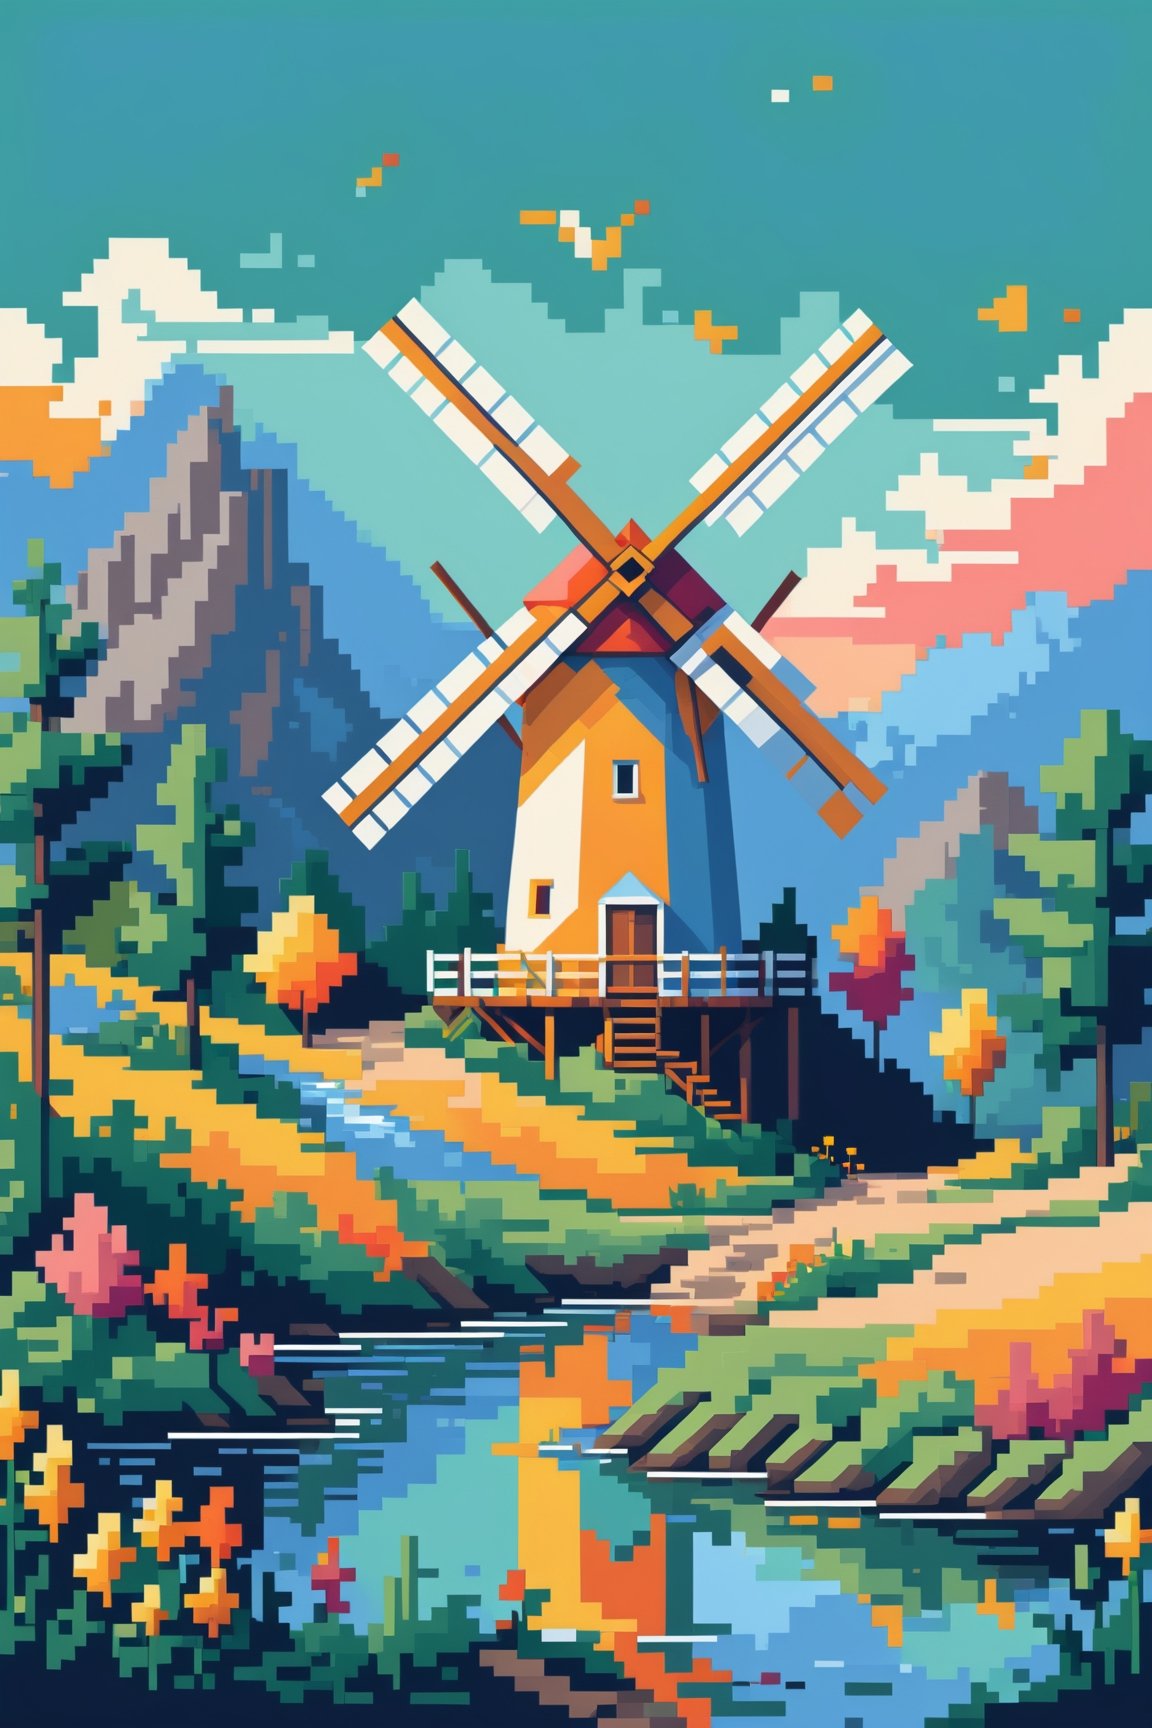 (Beautiful abstract composition:0.6), (Colorful illustration), ((minimalist pixel art illustration of deep scenery with flat coloring)), (outdoor scenery, windmill),pixel art style